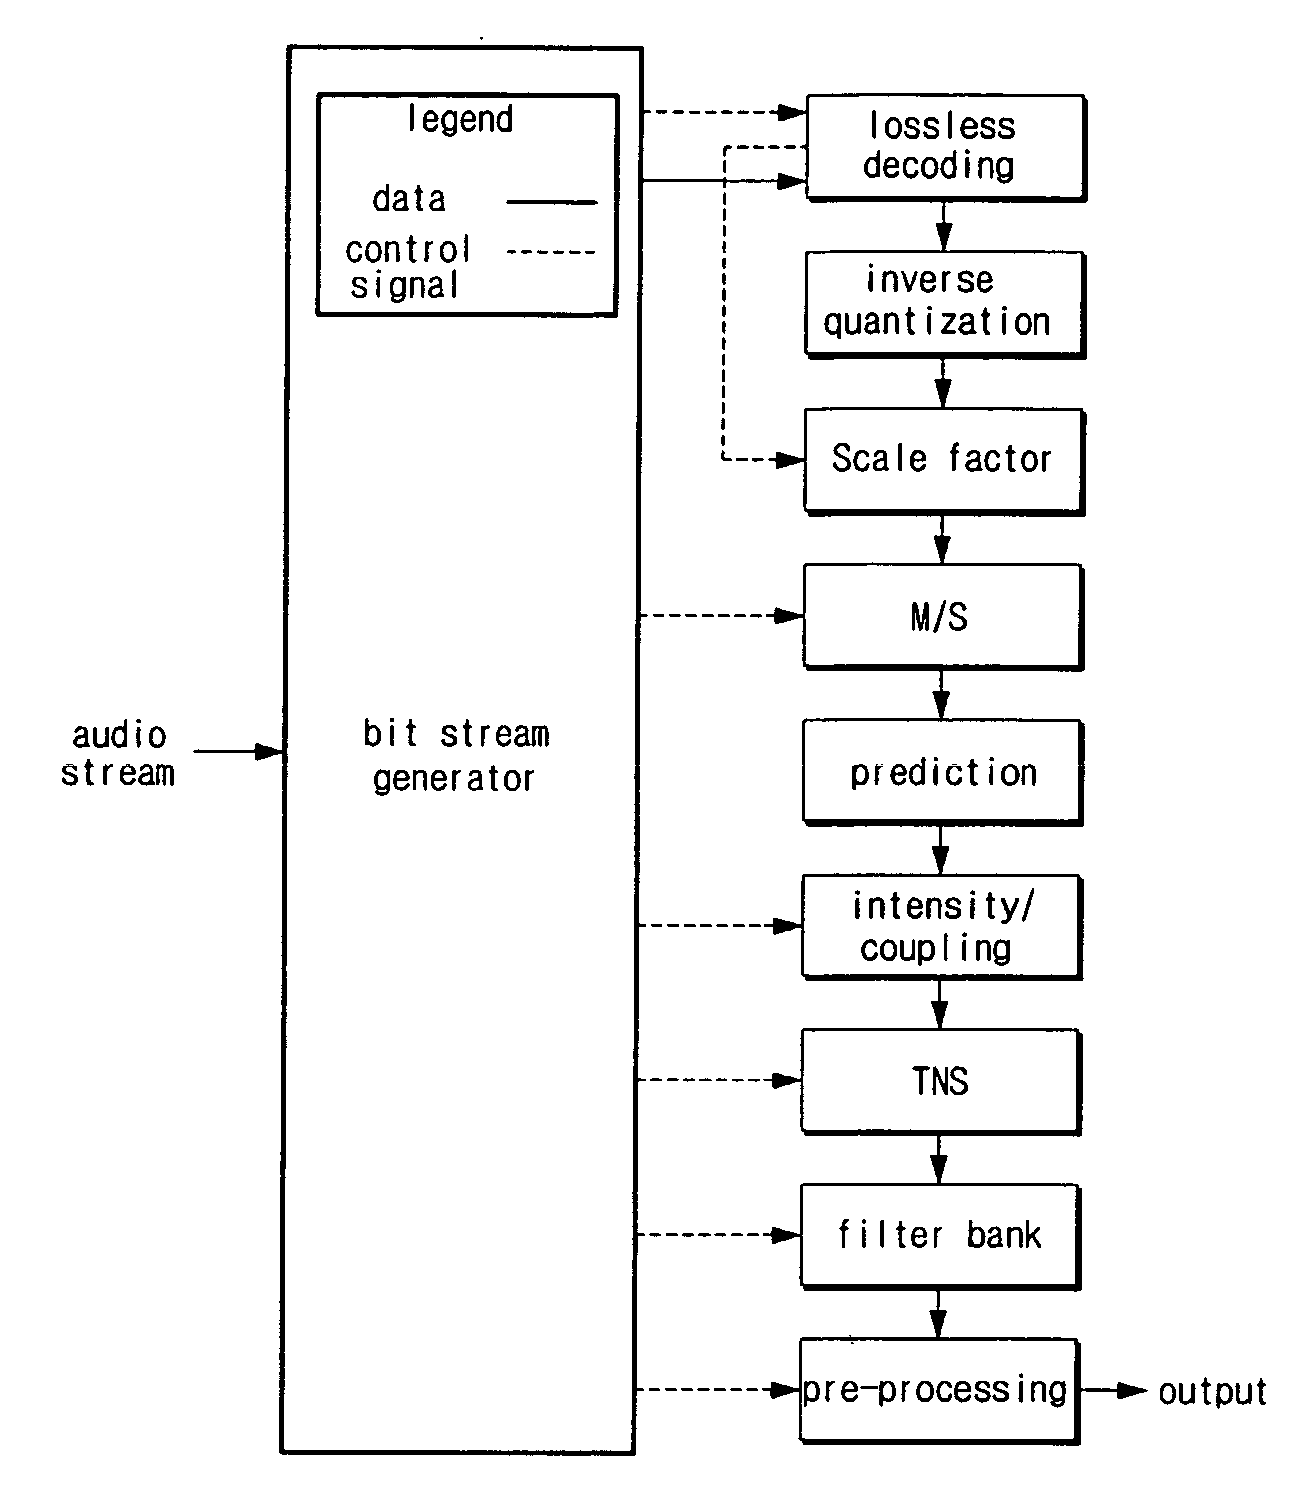 Computing circuits and method for running an MPEG-2 AAC or MPEG-4 AAC audio decoding algorithm on programmable processors